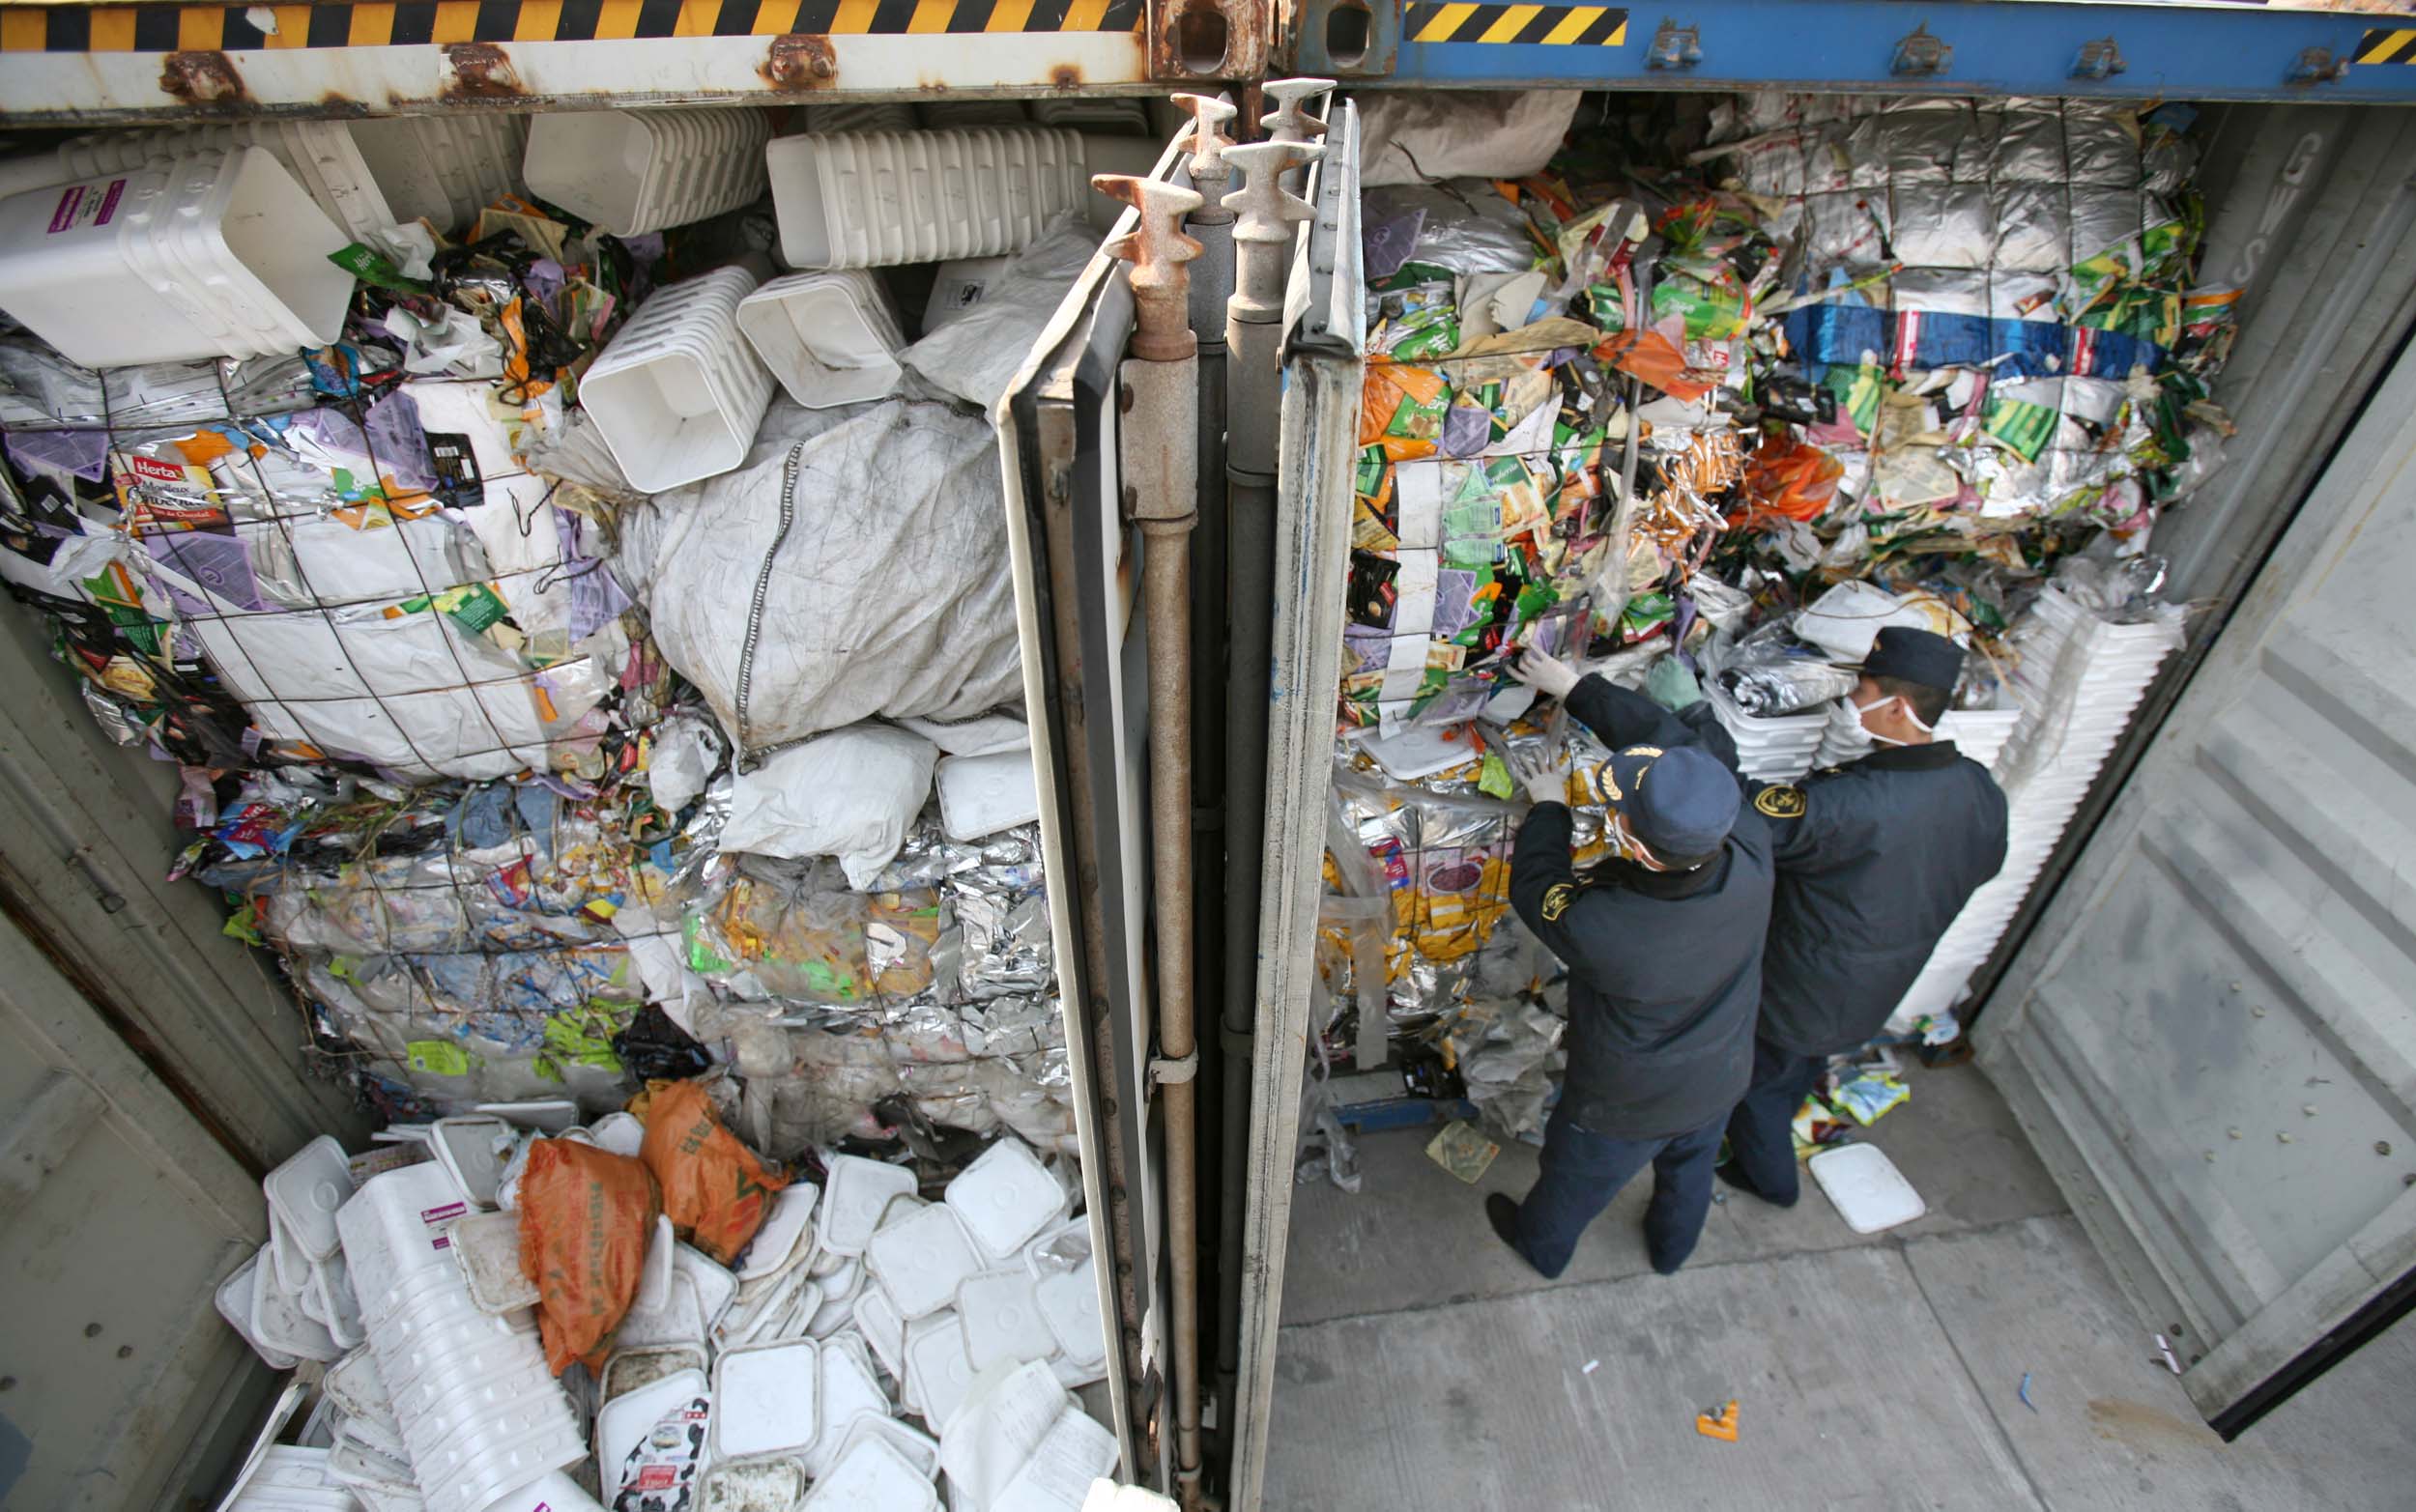 American's Largest Export to China - Trash